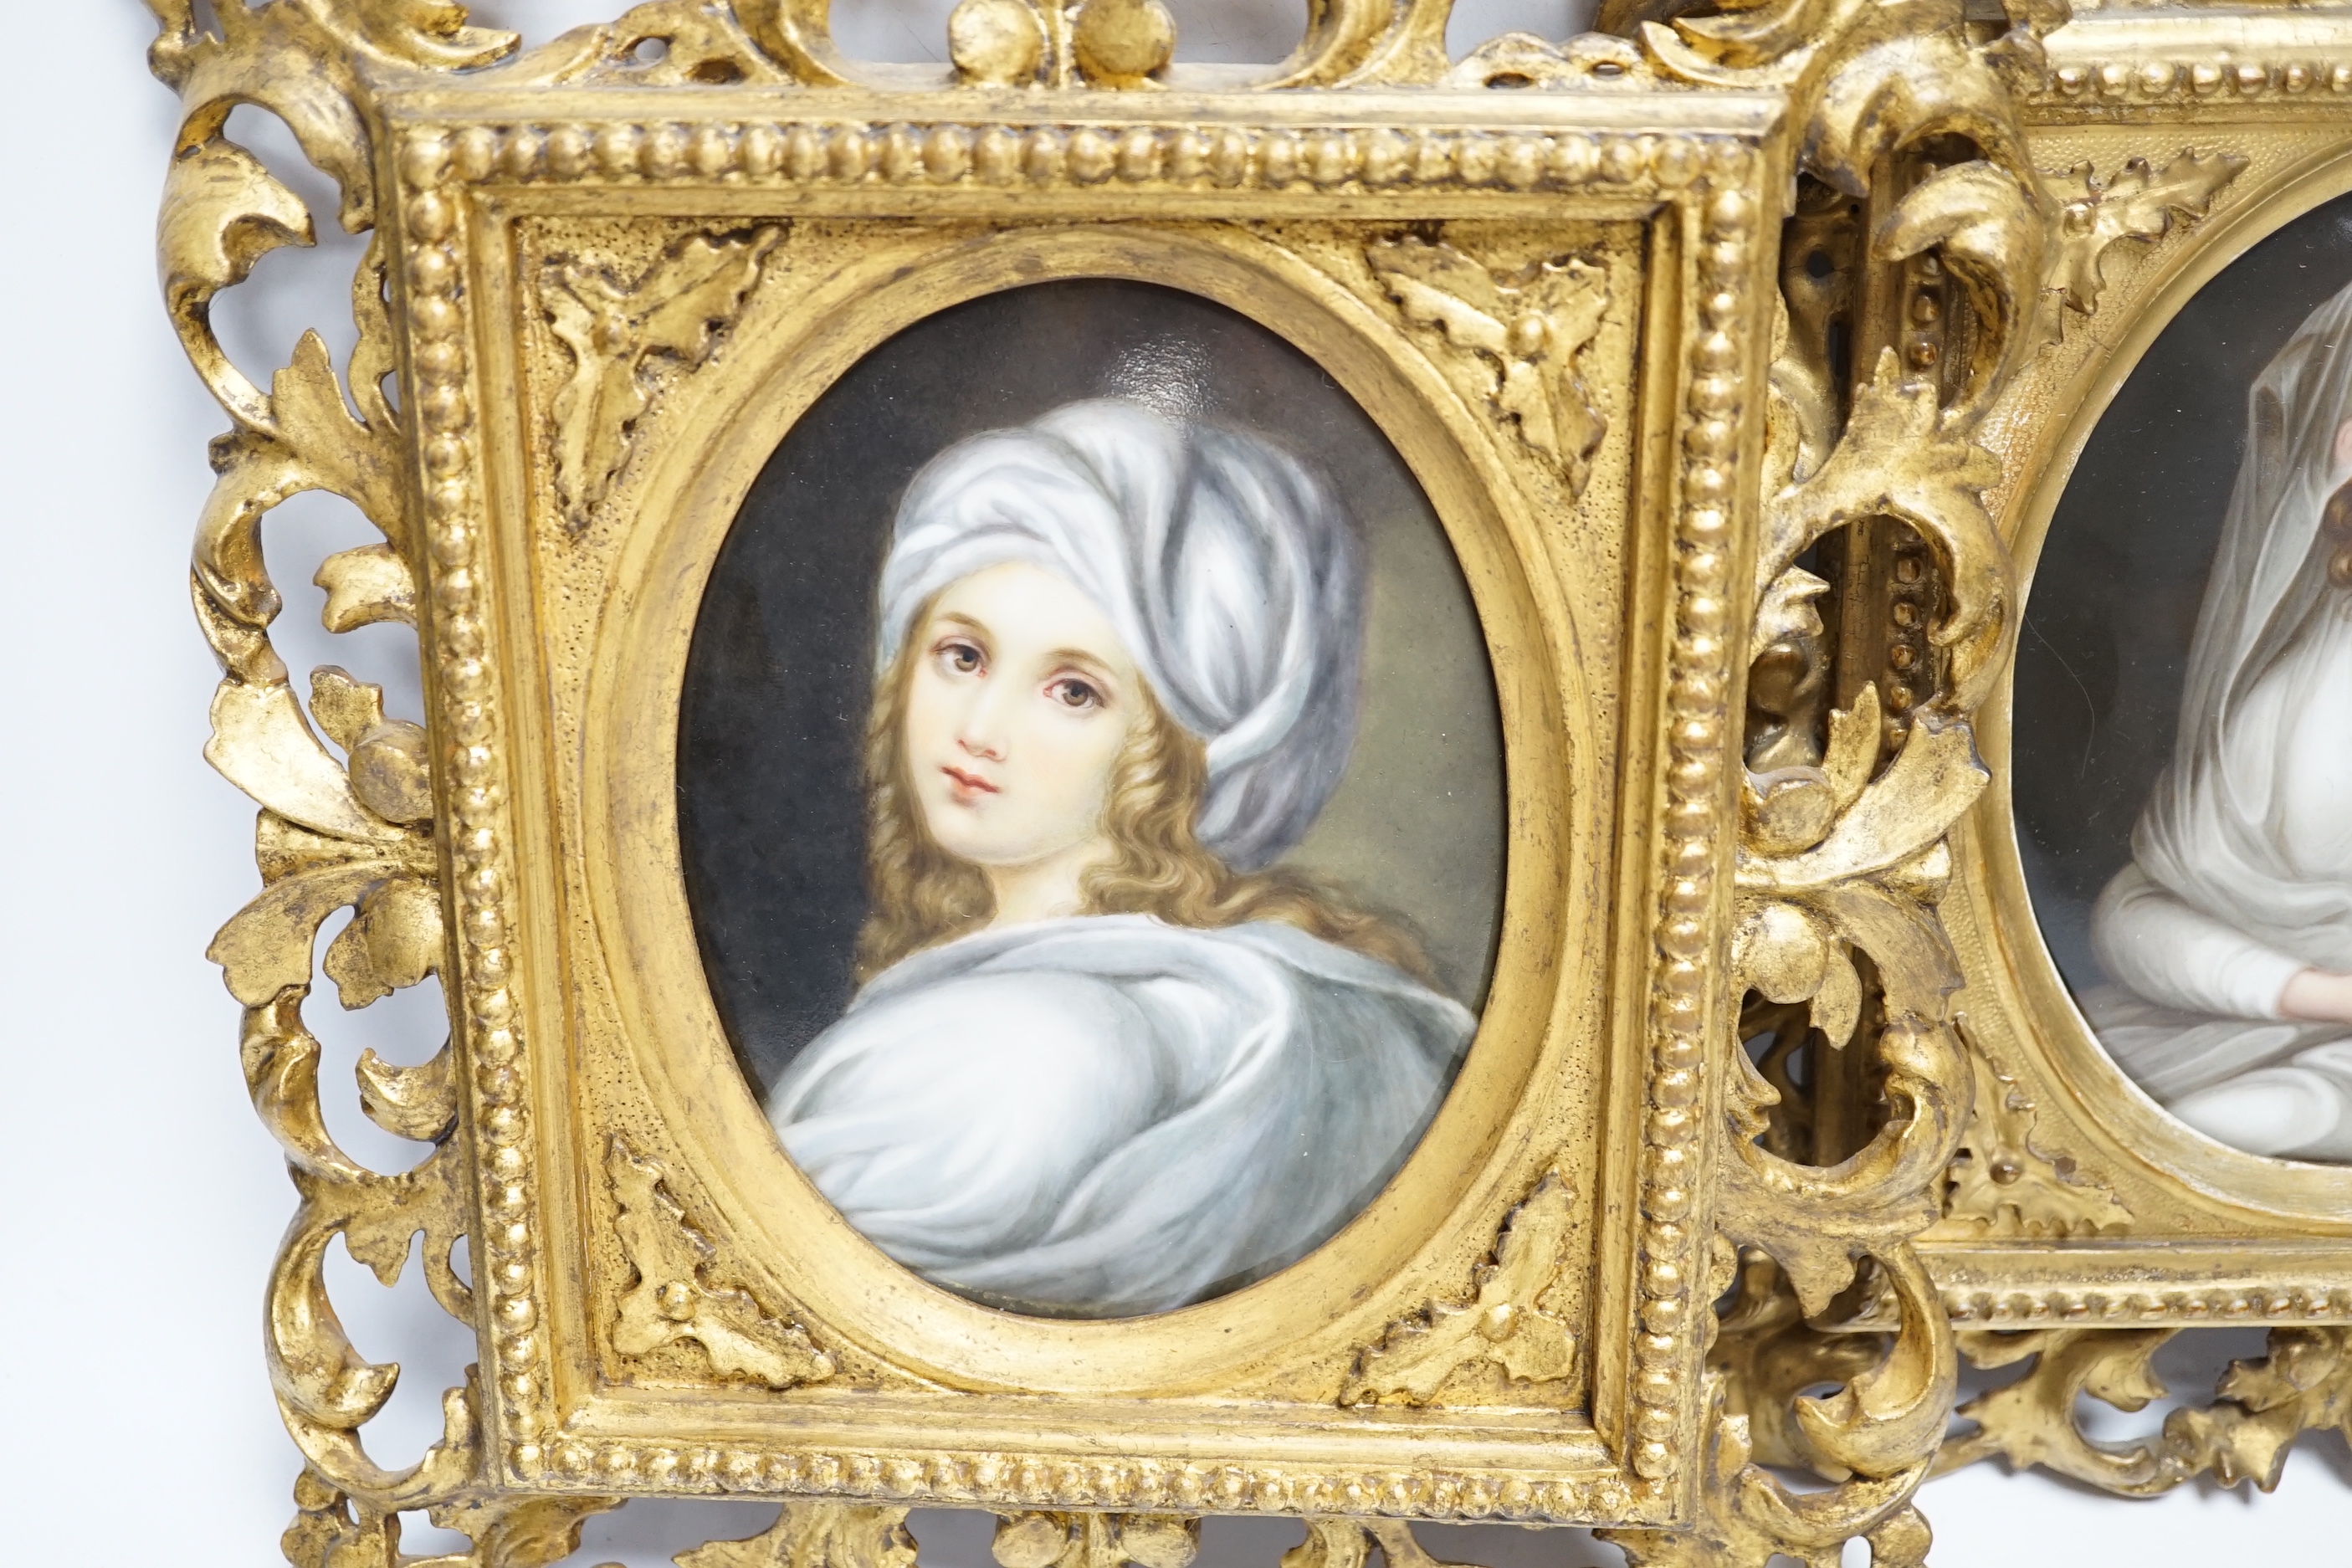 Two 19th century Continental porcelain oval plaques, in similar gilt Florentine frames